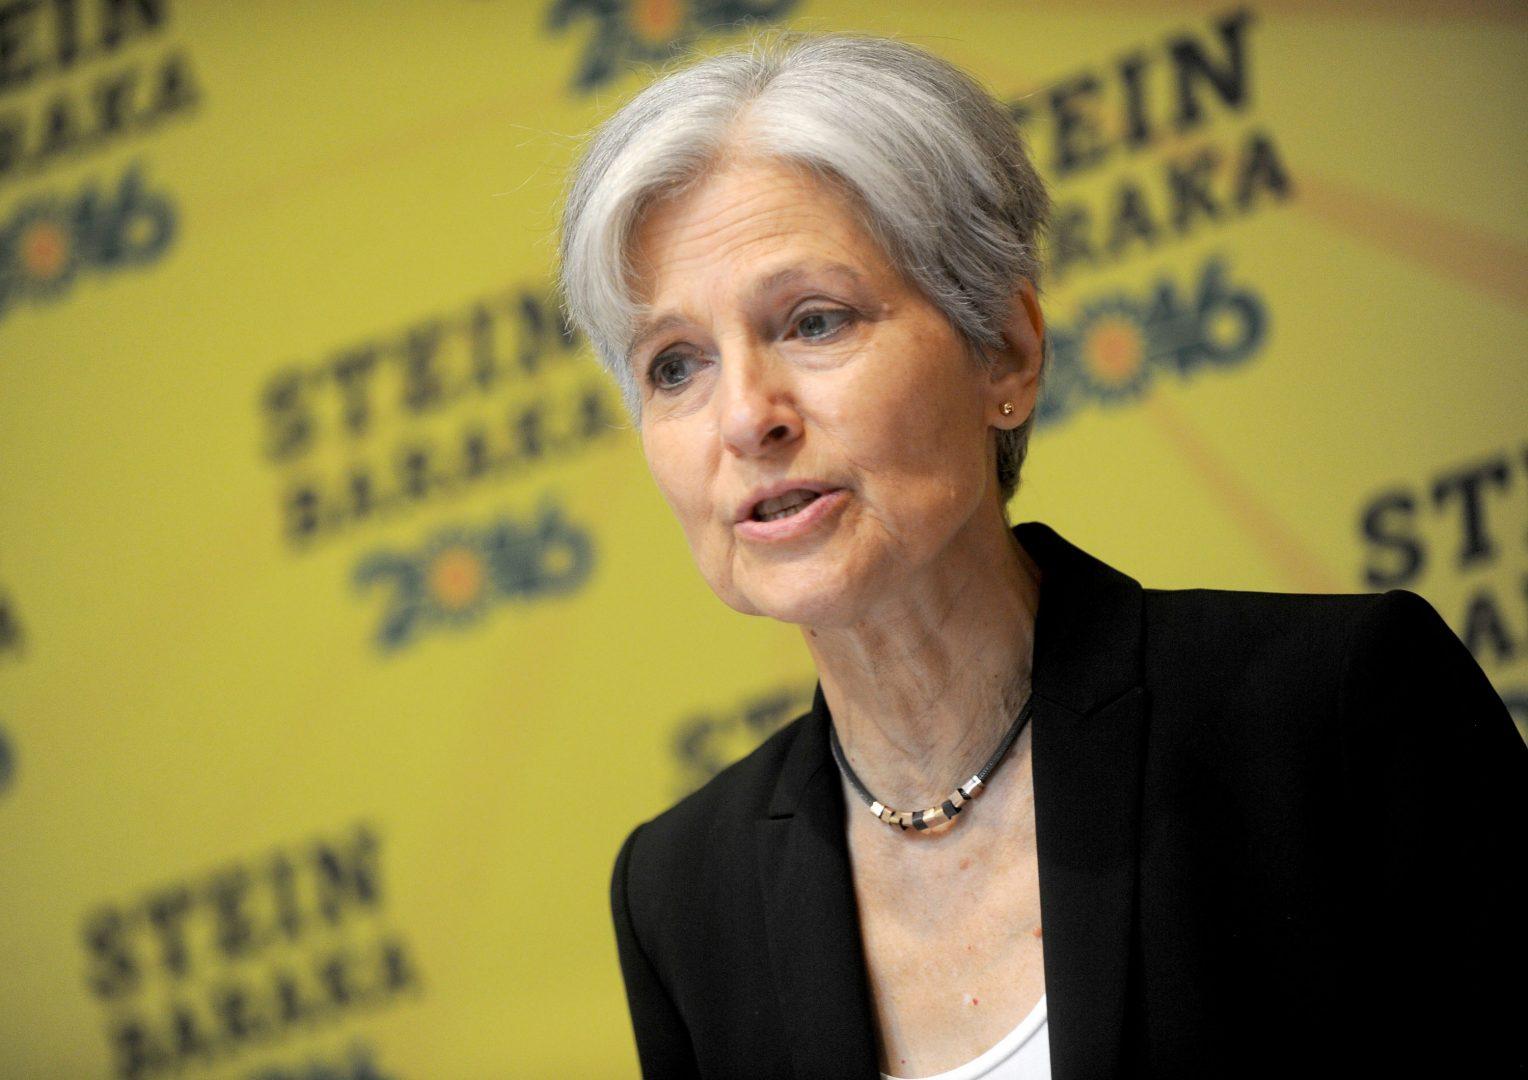 Green Party presidential candidate Jill Stein on Aug. 19, 2016 at the Holiday Inn Lower East Side, in New York City, N.Y. (Dennis Van Tine/Abaca Press/TNS)